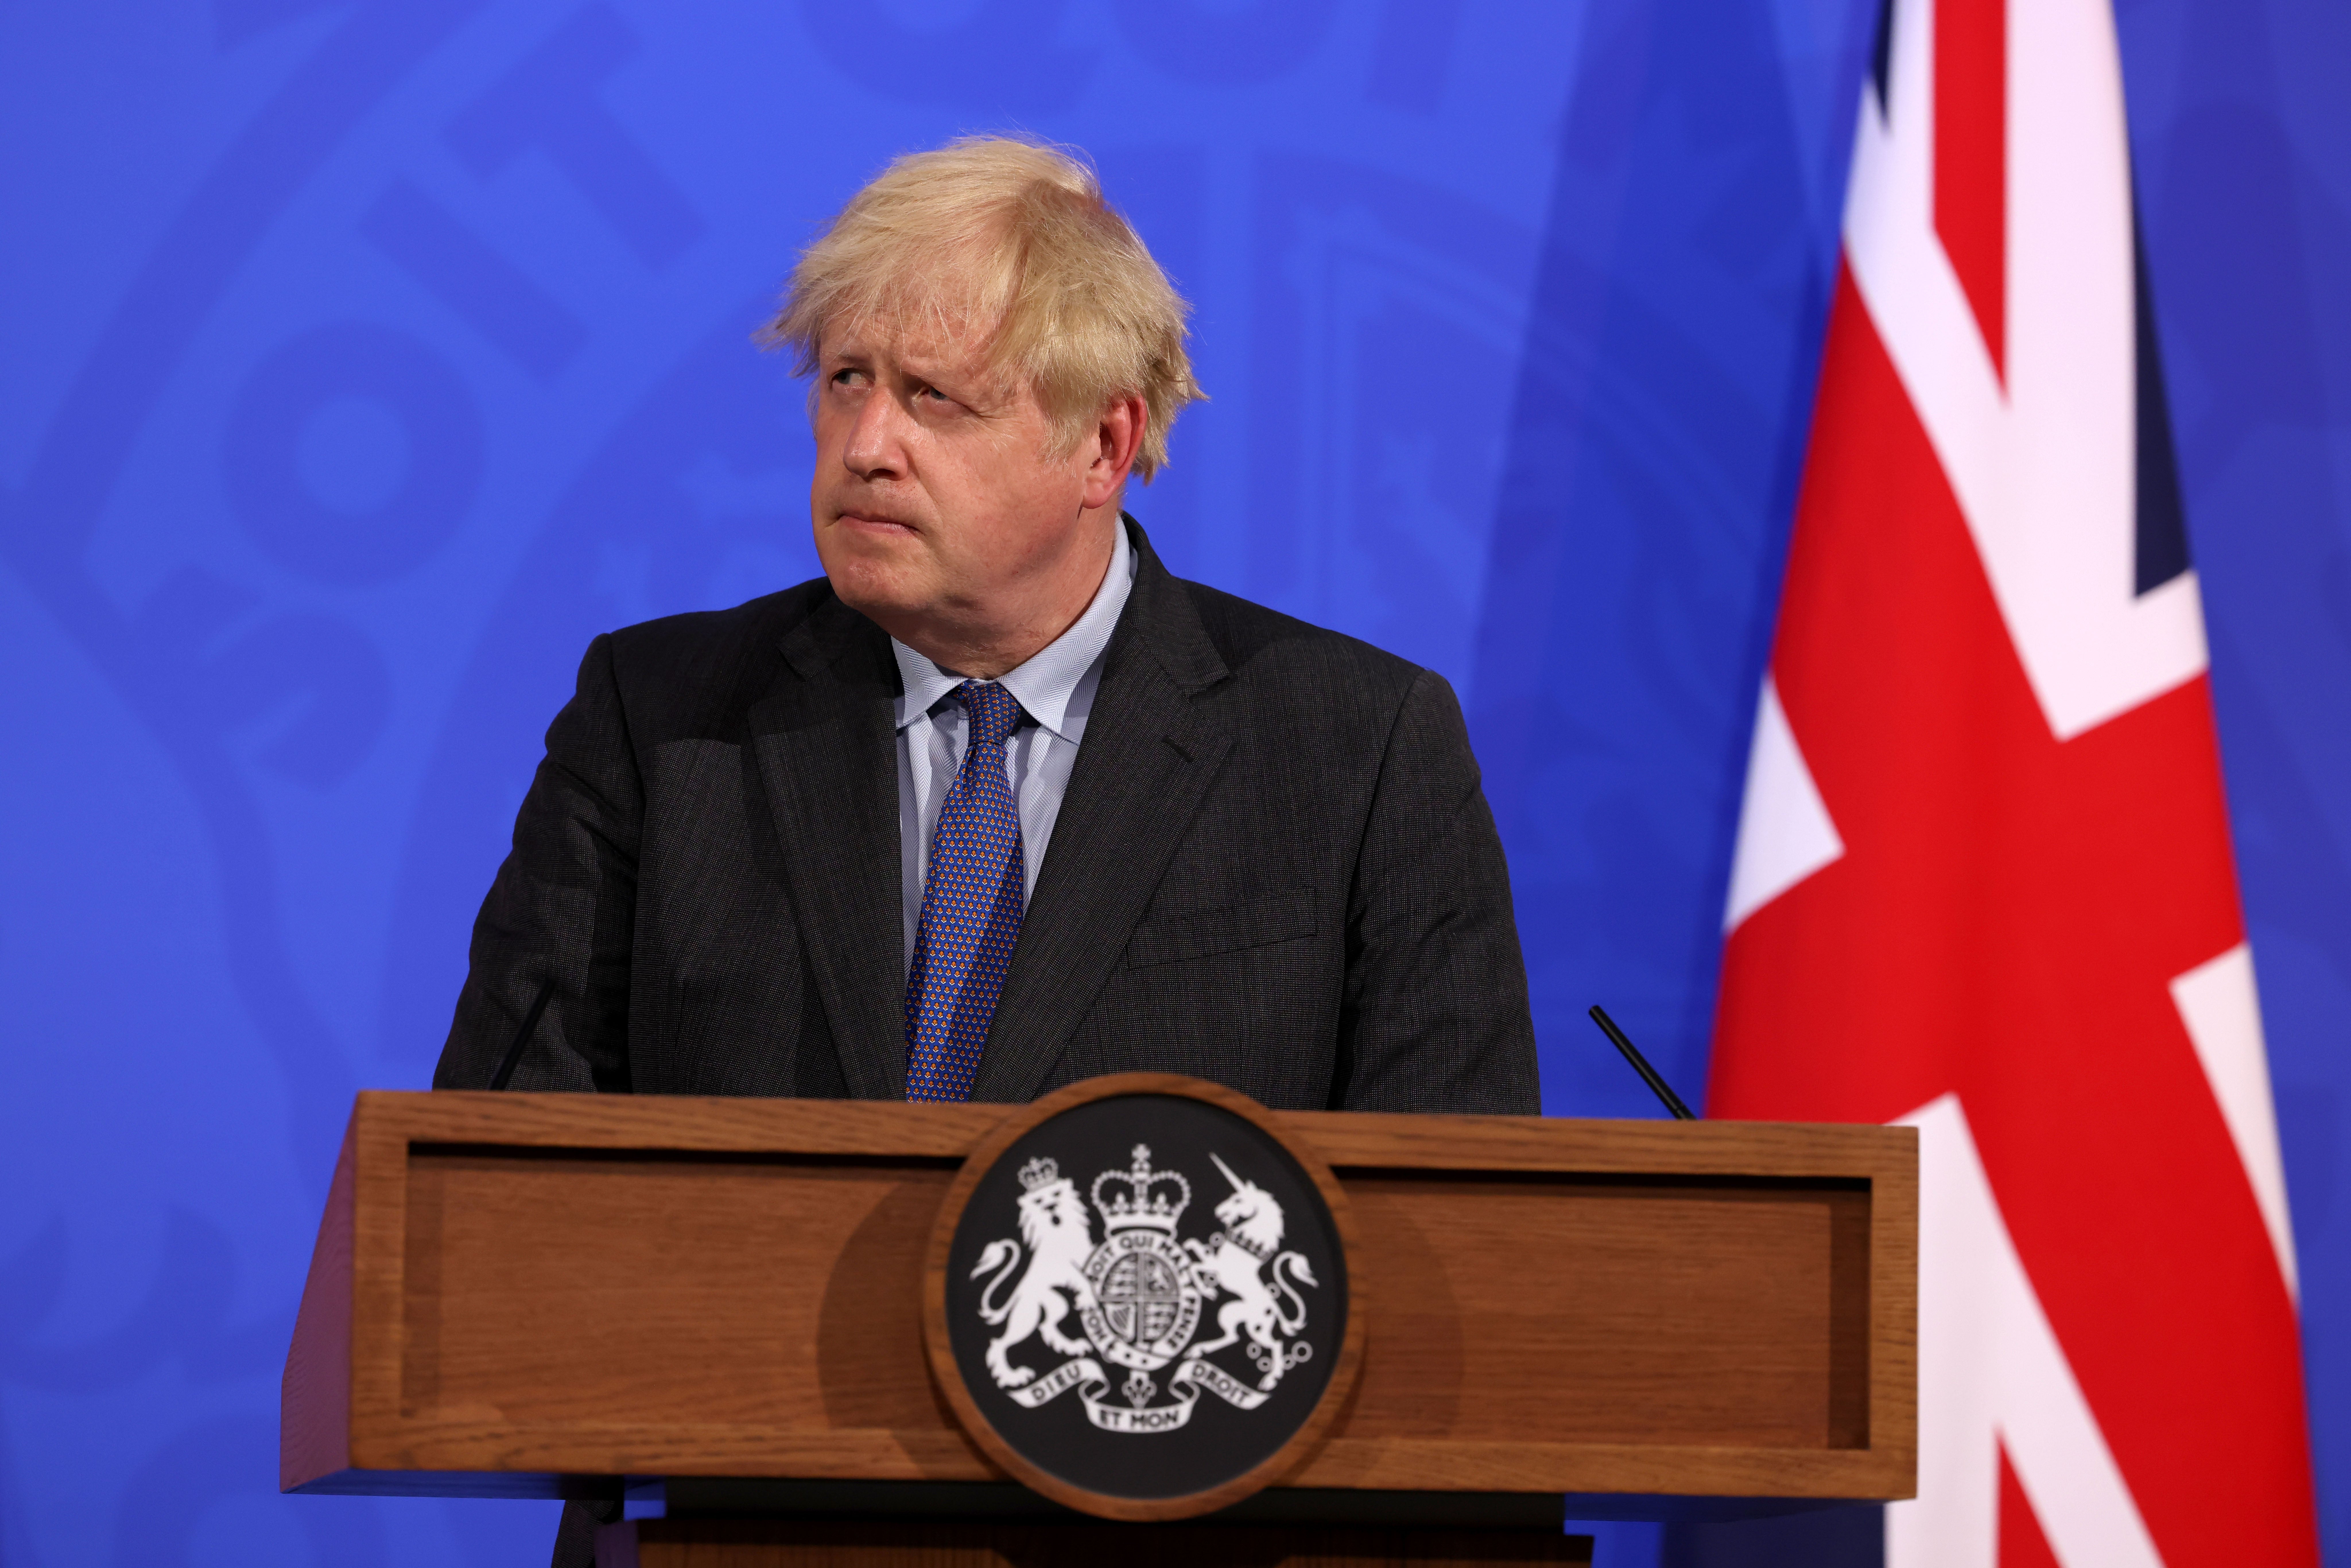 Boris Johnson announced on Monday the lockdown exit would be delayed